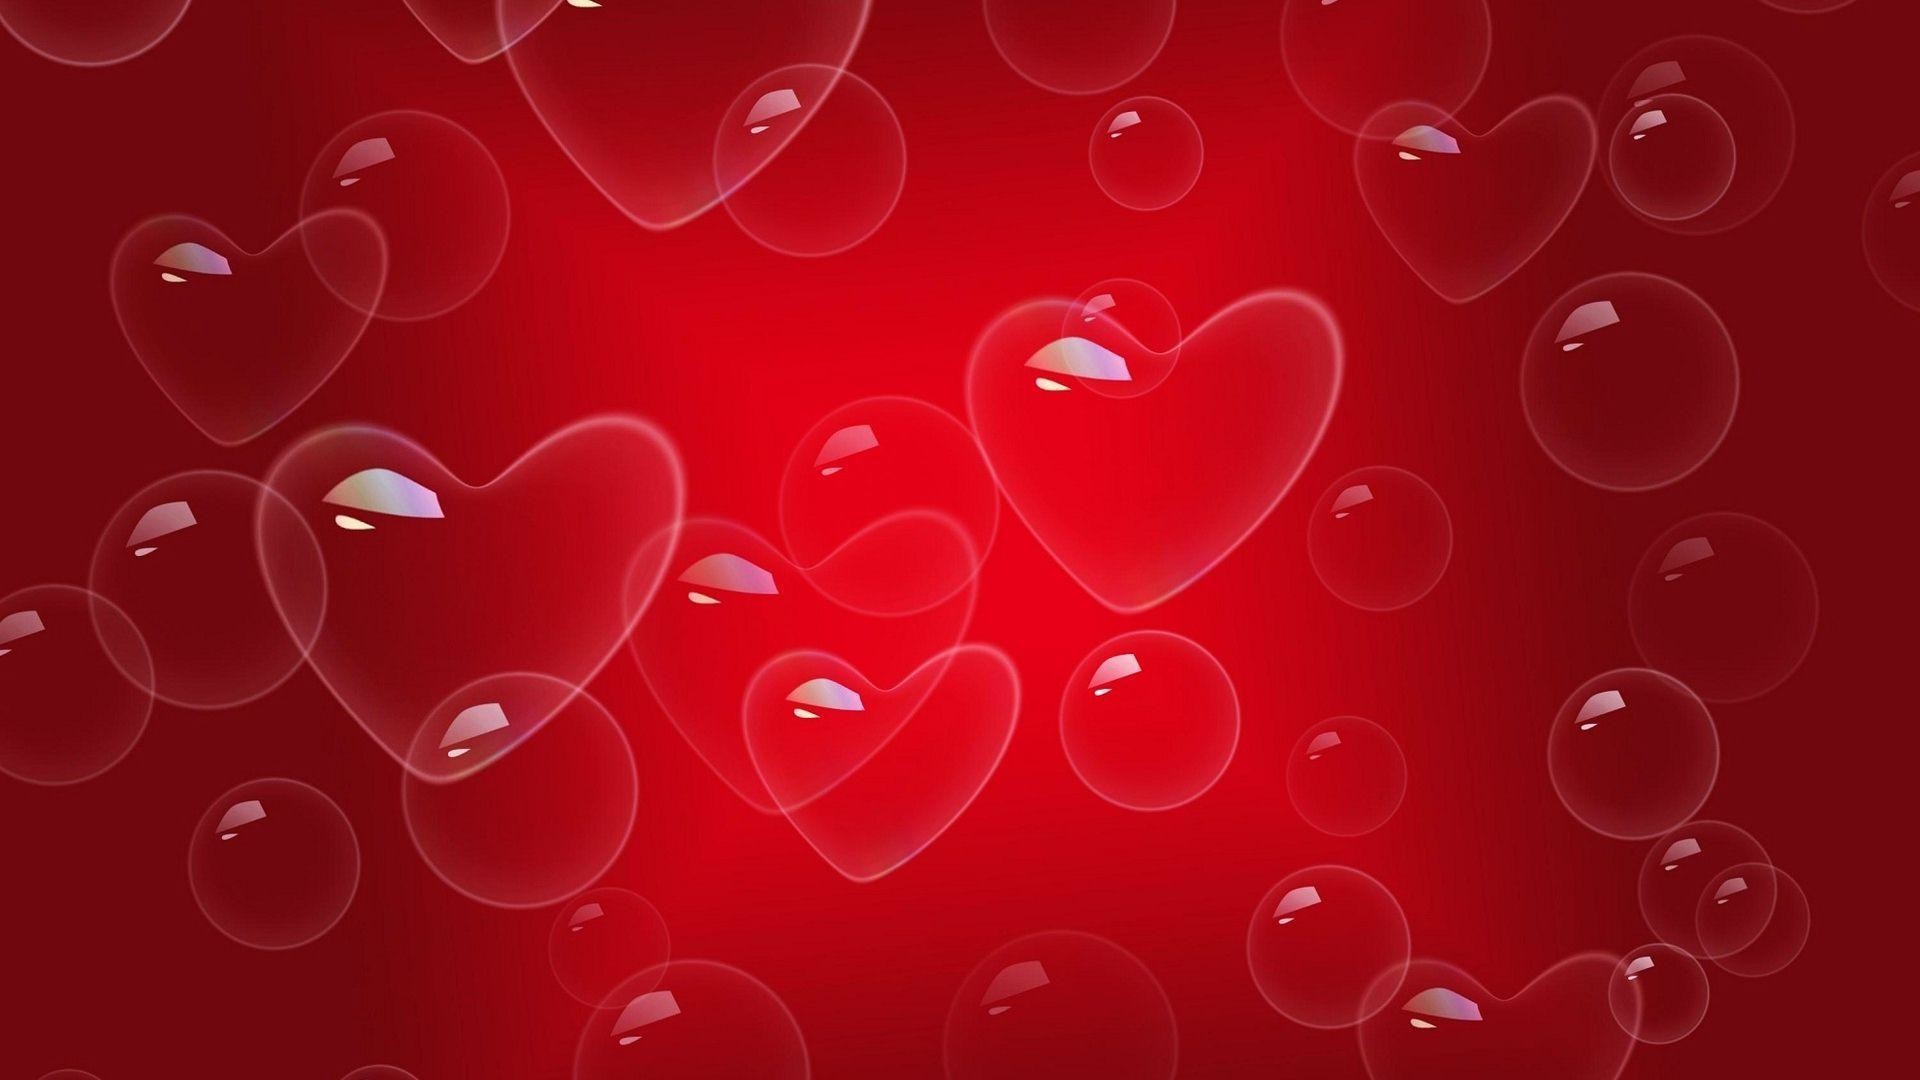 Love Heart Bubbles Red Background Images HD Wallpapers Images